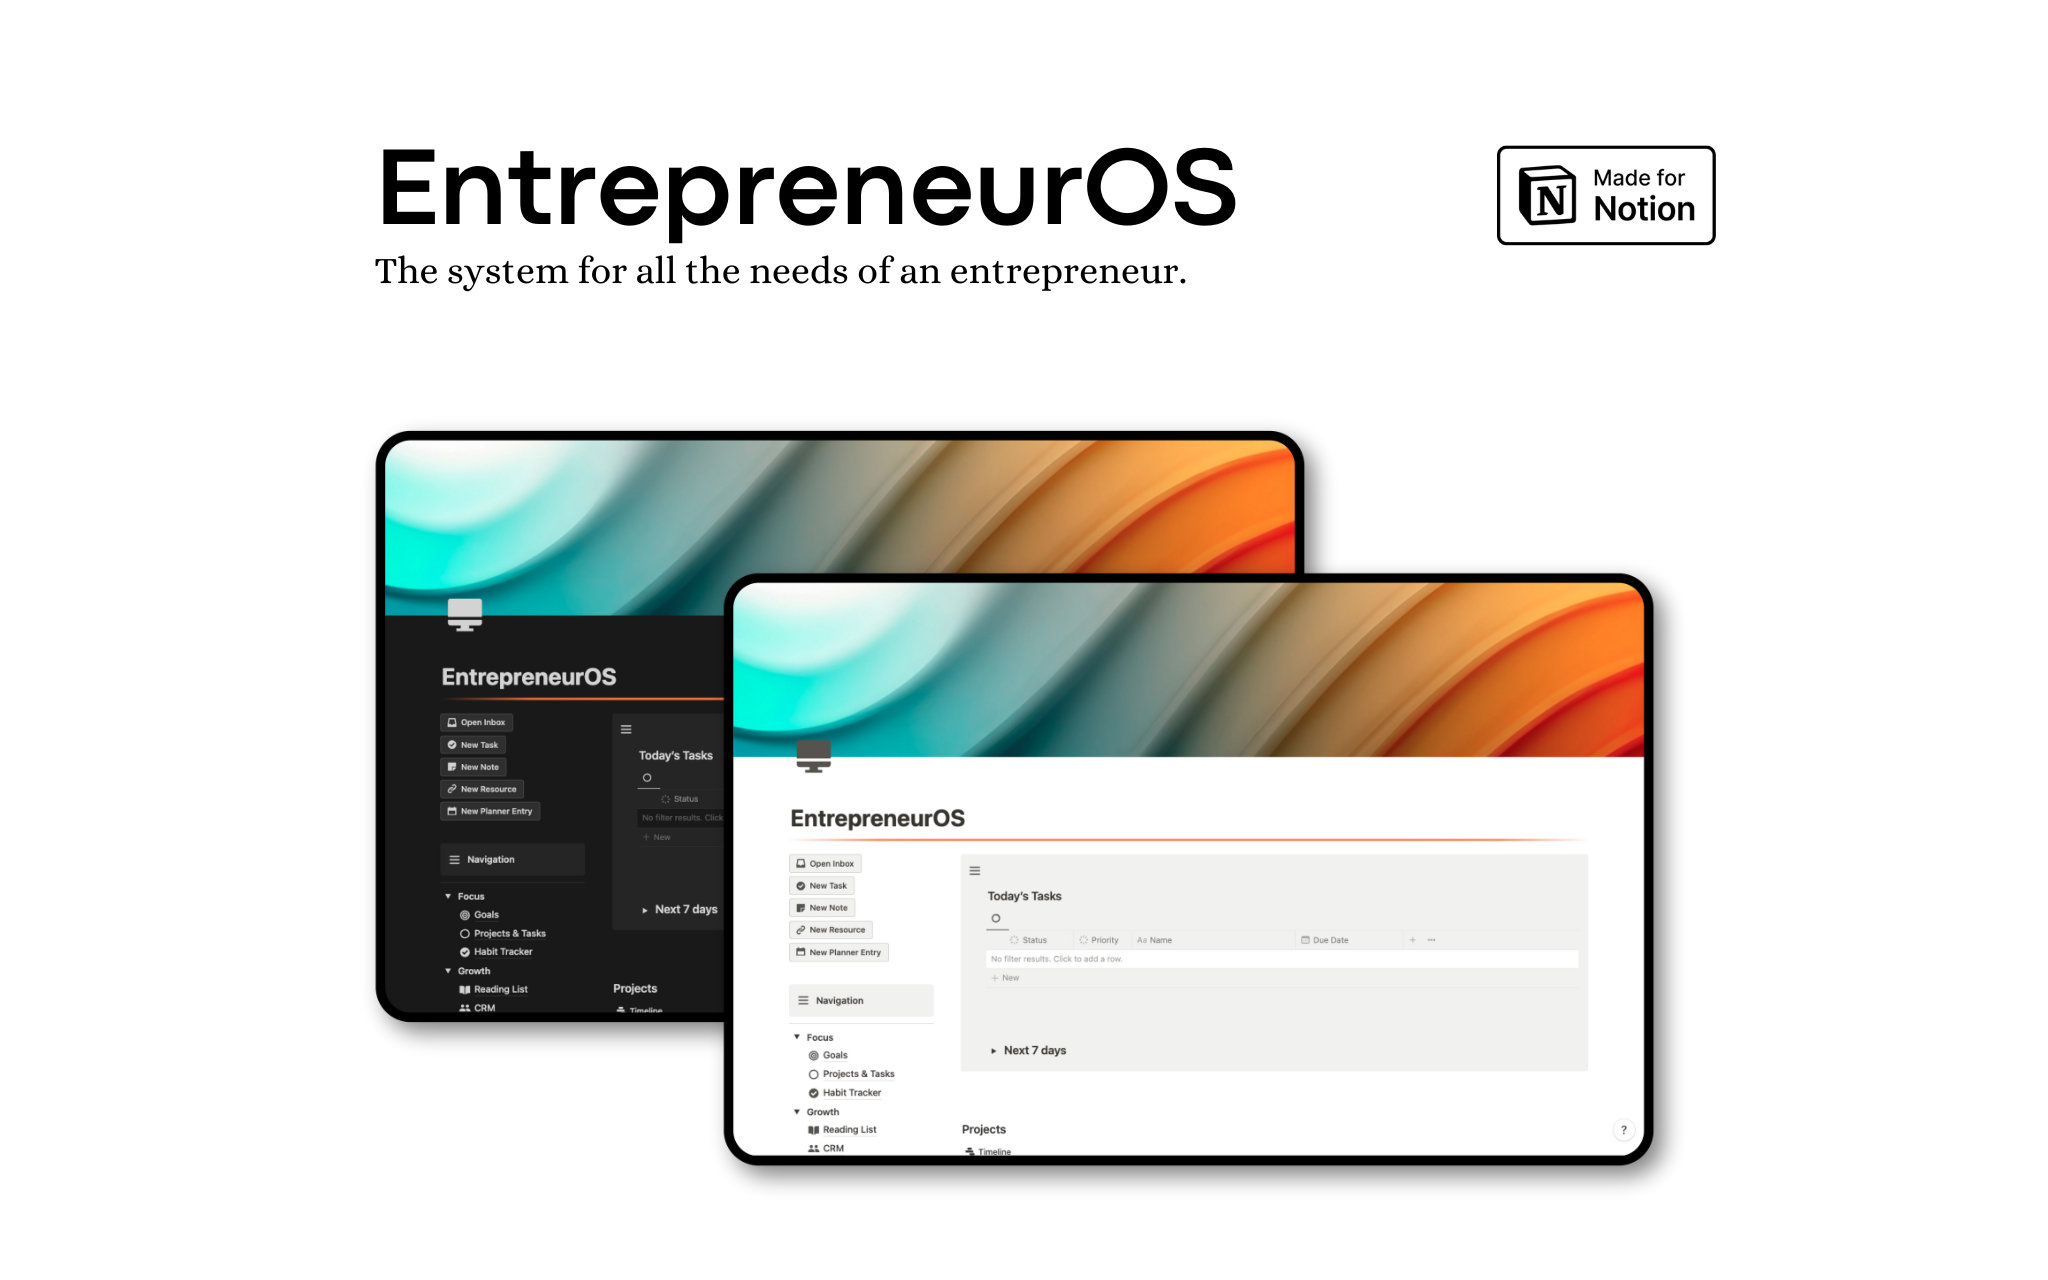 Streamline your strategy, optimize your operations, and unleash your potential seamlessly. 
EntrepreneurOS: Your ultimate toolkit for a smarter, more efficient entrepreneurial journey.